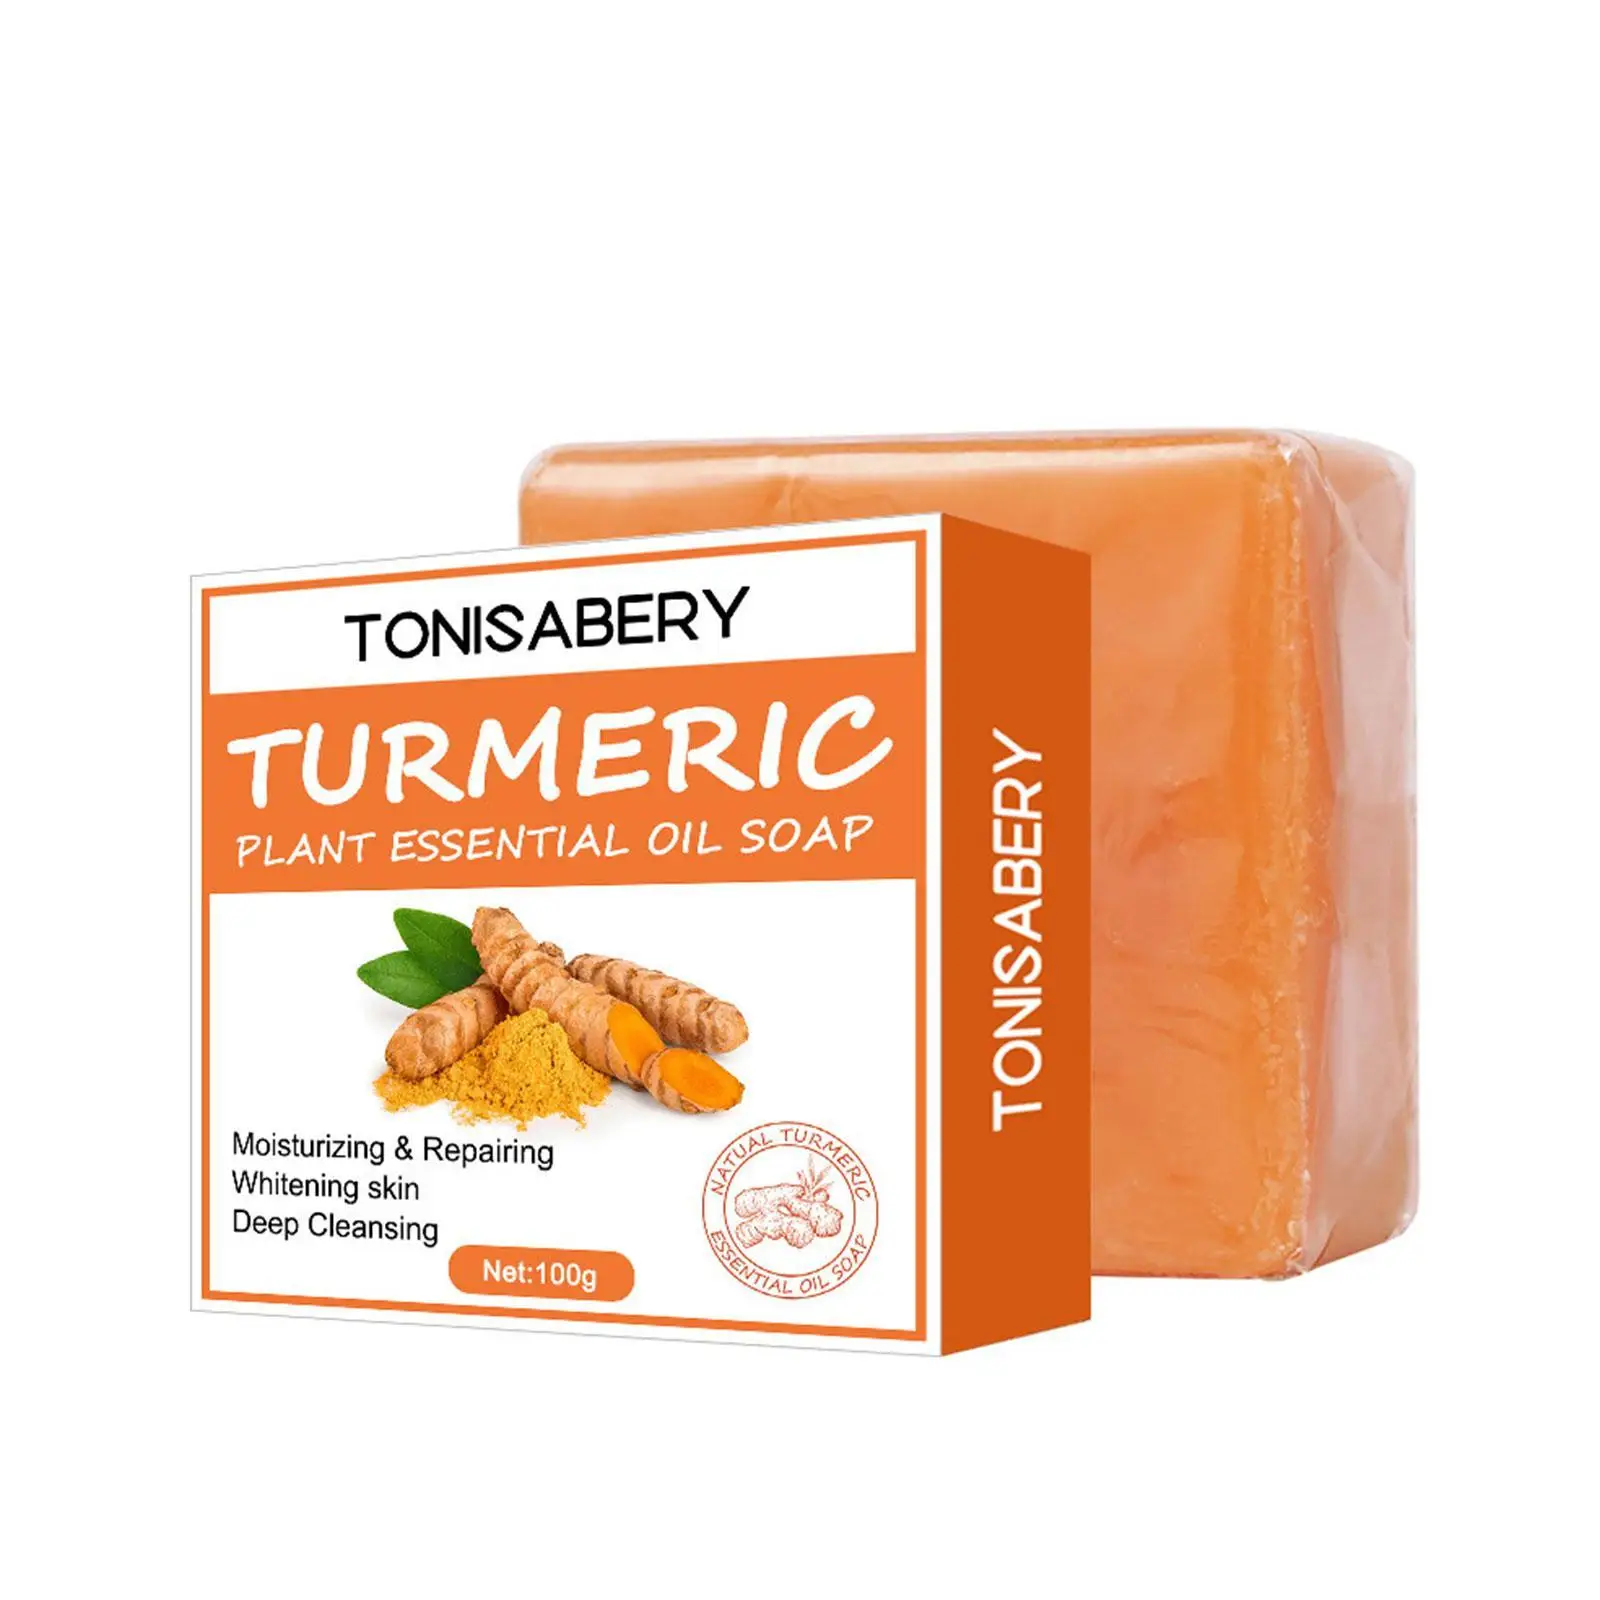 

Turmeric Cream Whitening Soap Reduction Acne Scars Dark Spots and Wrinkles Natural Radiant Skin Smoothing Facial Handmade Soap